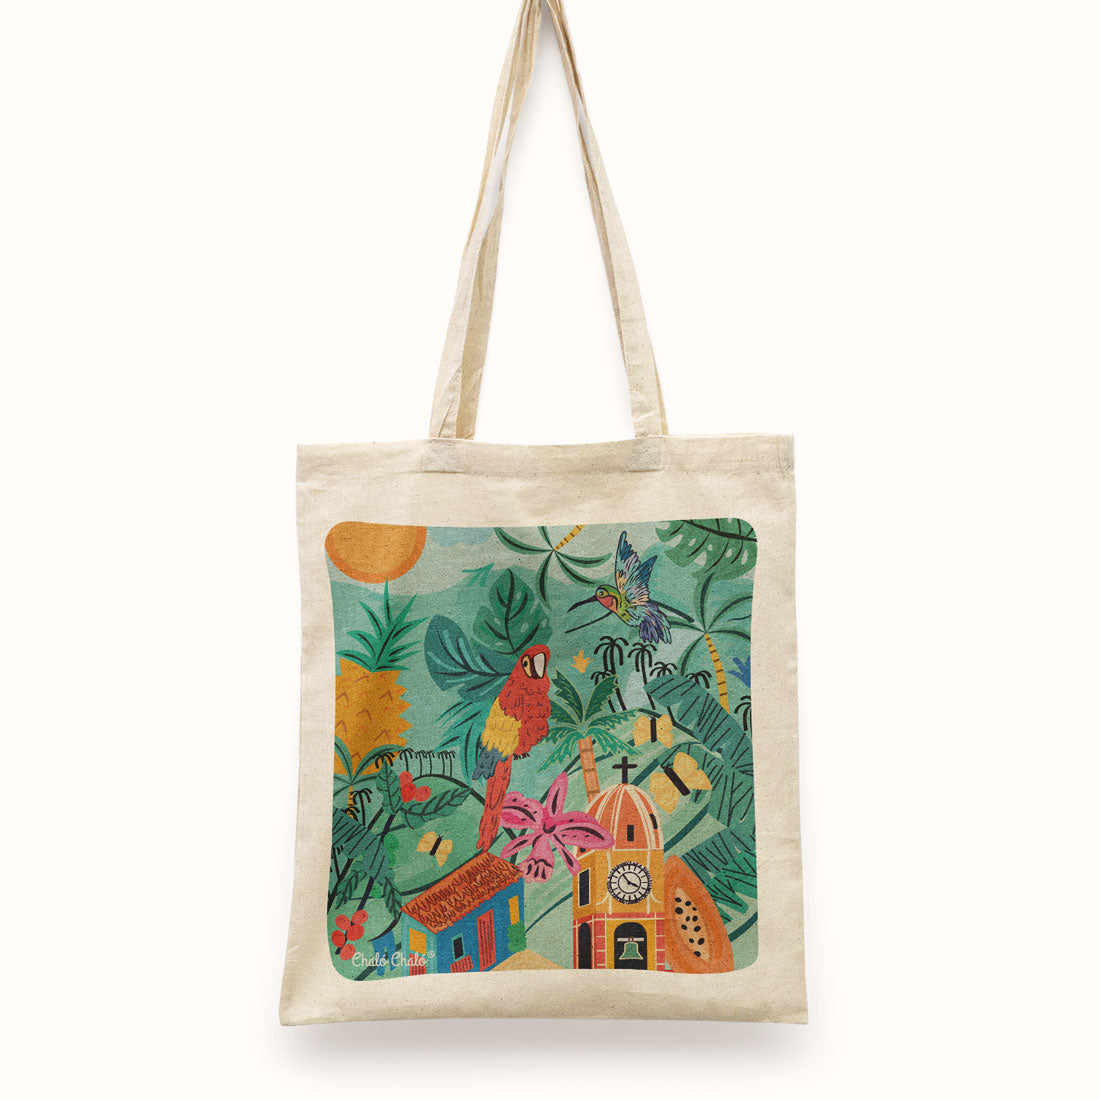 Colors of Colombia Tote Bag